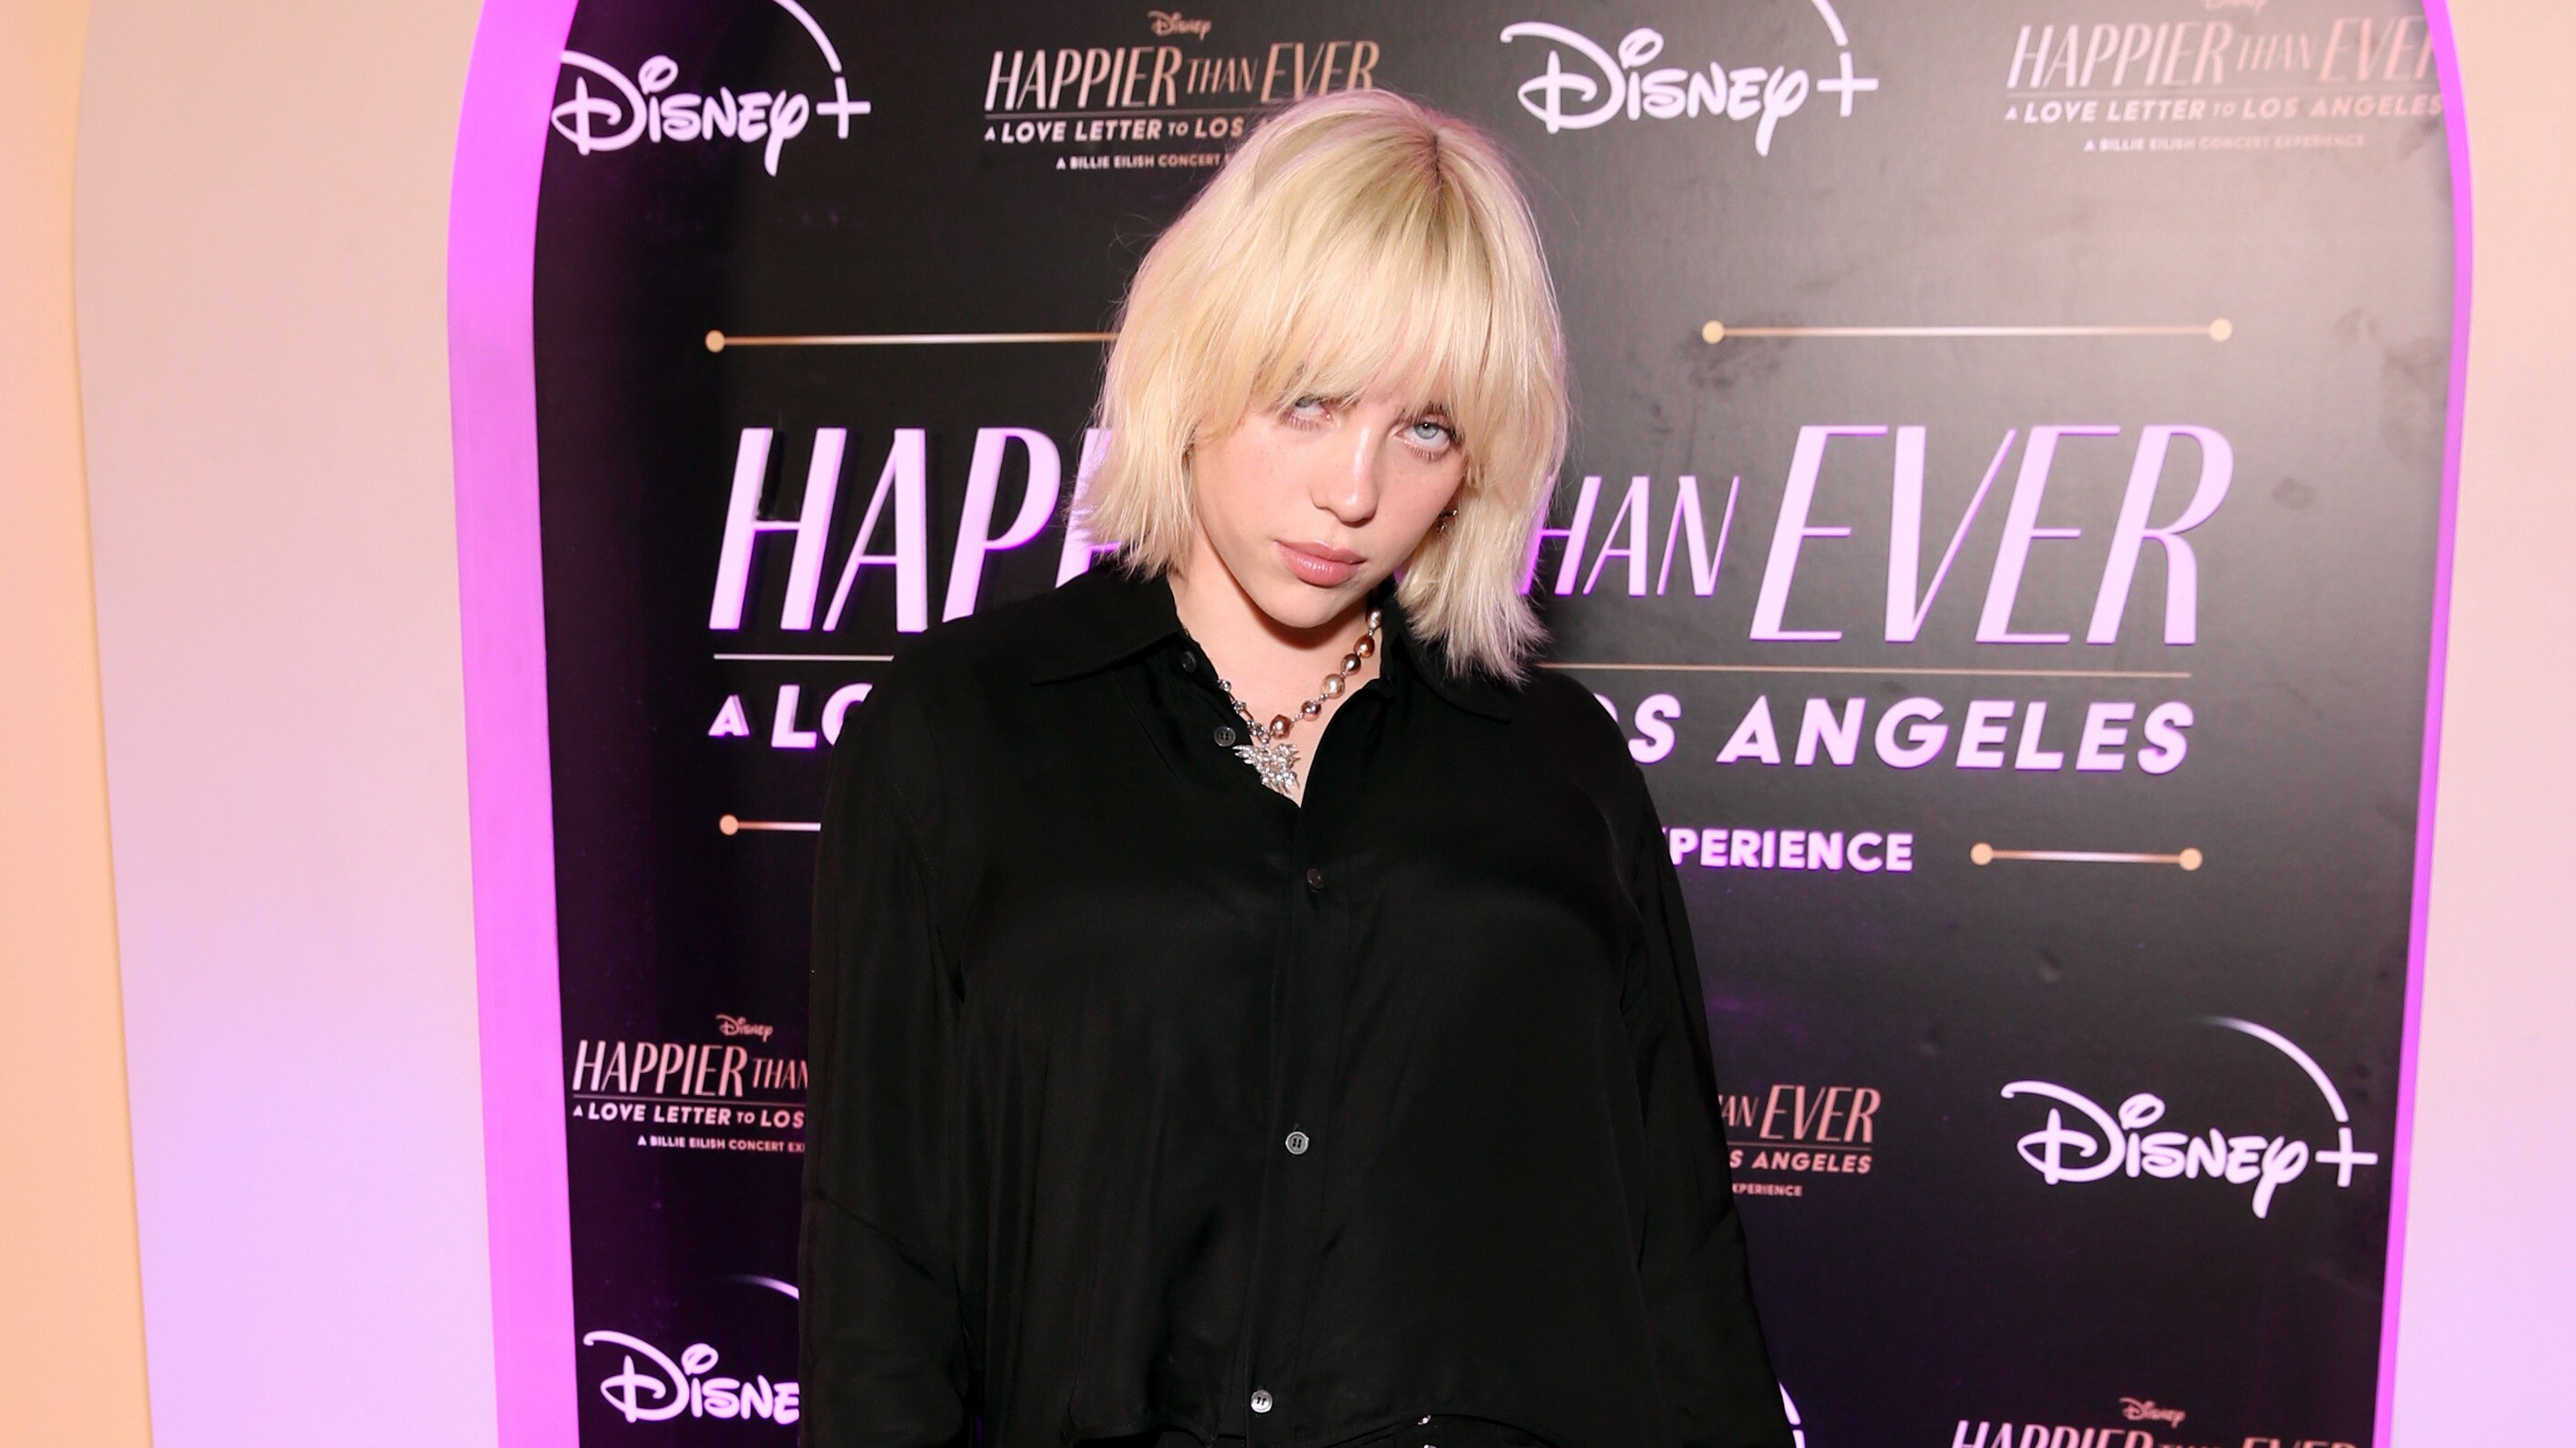 LOS ANGELES, CALIFORNIA - AUGUST 30: Billie Eilish attends "Happier Than Ever: A Love Letter To Los Angeles" Worldwide Premiere at The Grove on August 30, 2021 in Los Angeles, California. (Photo by Jesse Grant/Getty Images for Disney)